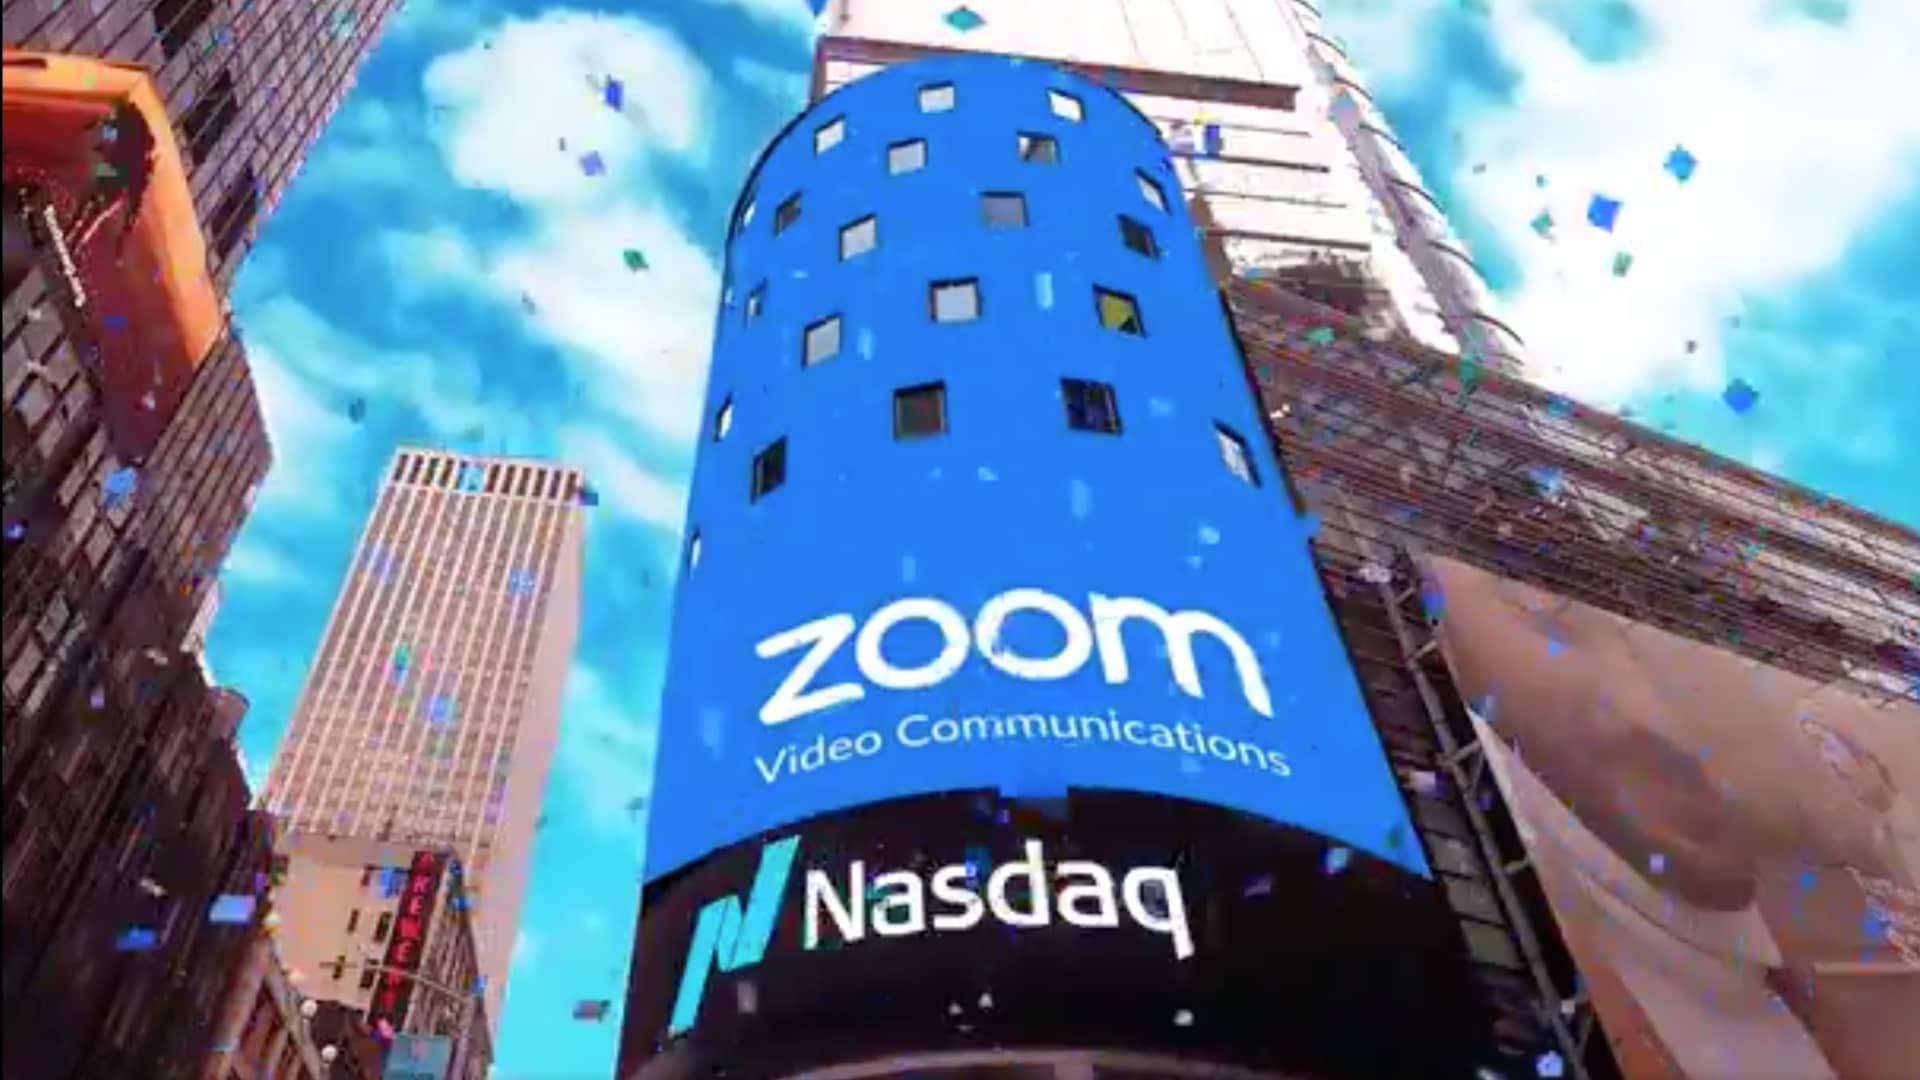 Stocks making the biggest moves midday: Twitter, Zoom, Palo Alto Networks, Macy’s and more